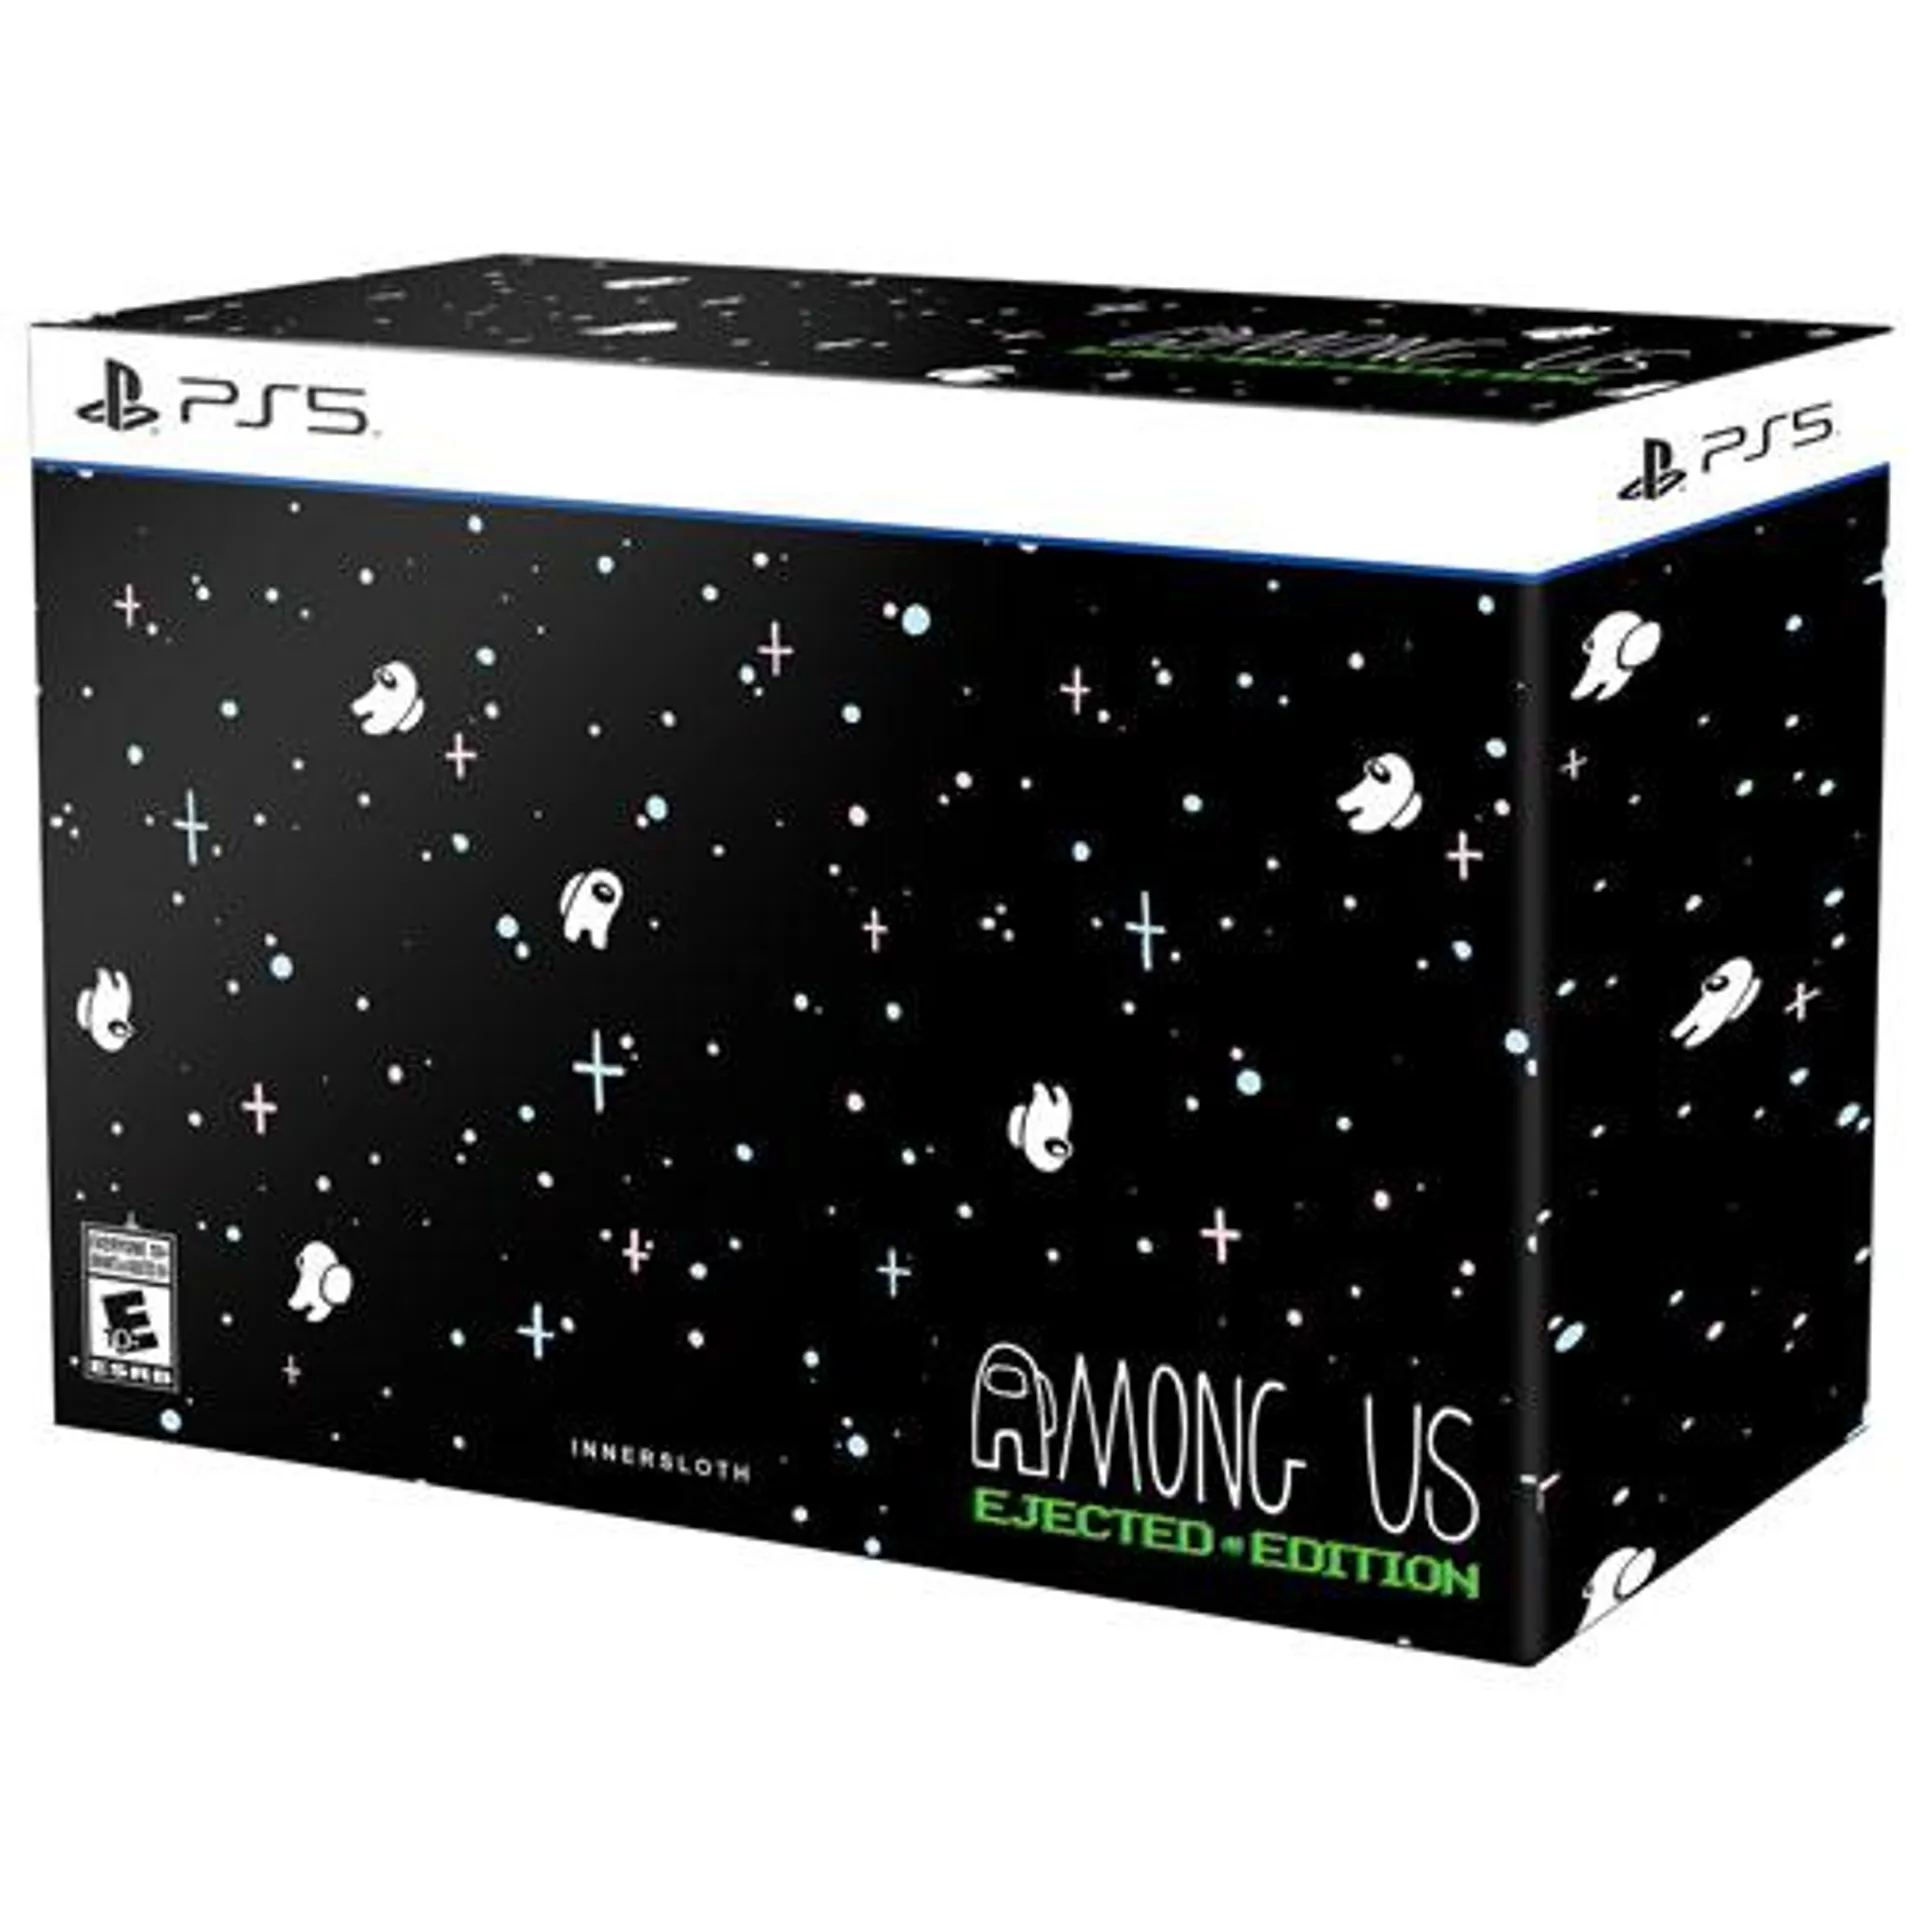 Among Us Ejected Edition (PS5)